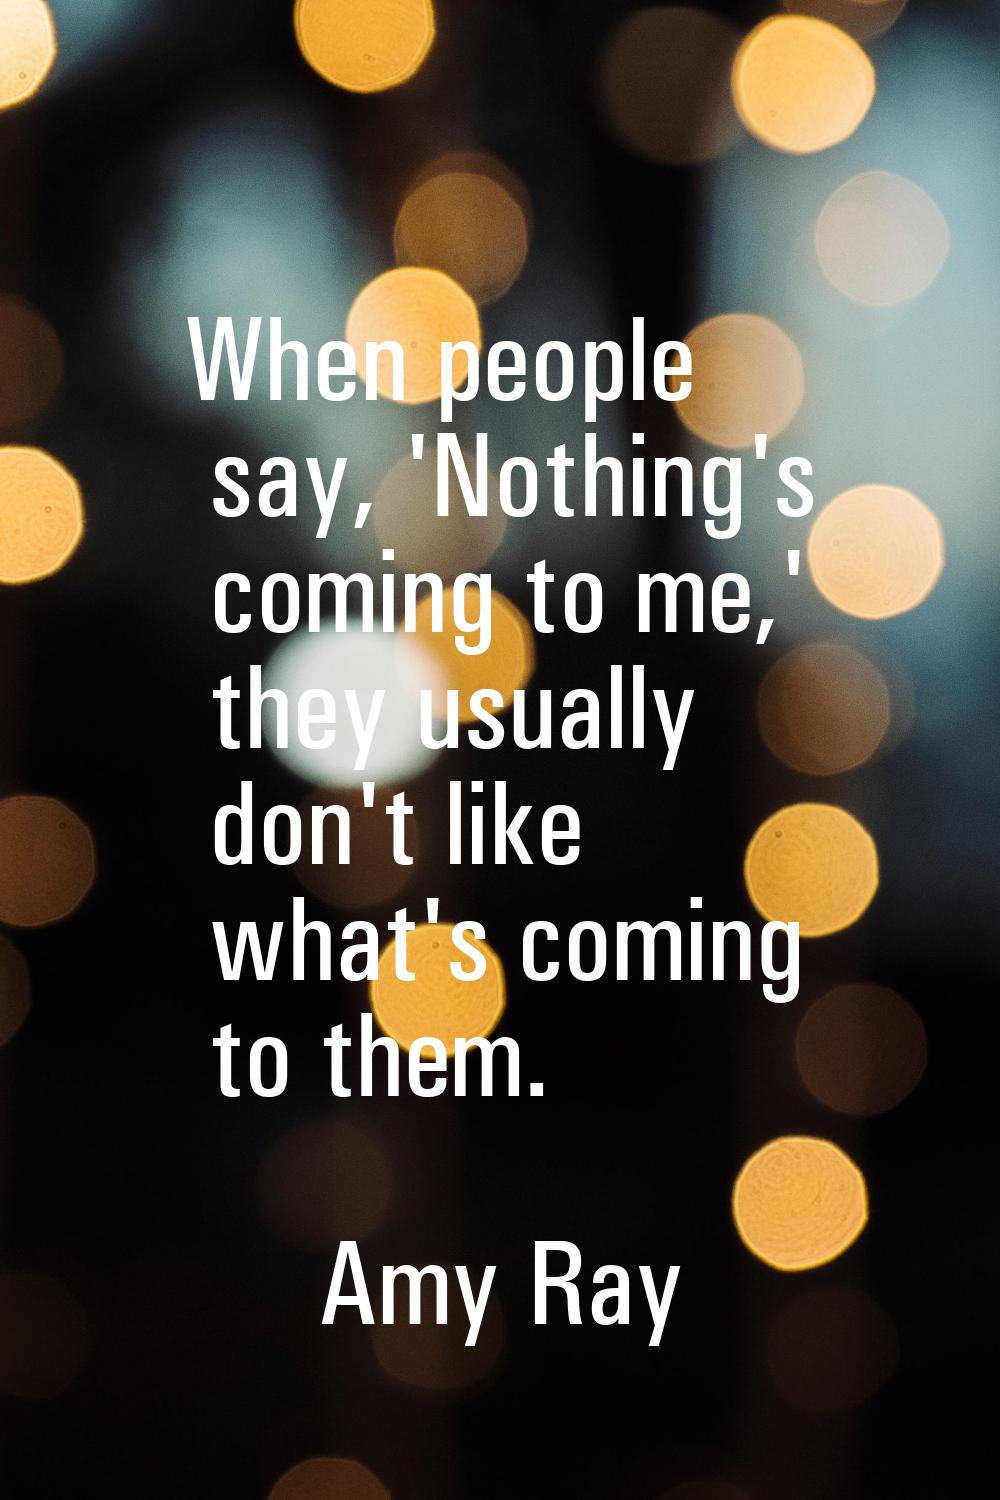 When people say, 'Nothing's coming to me,' they usually don't like what's coming to them.